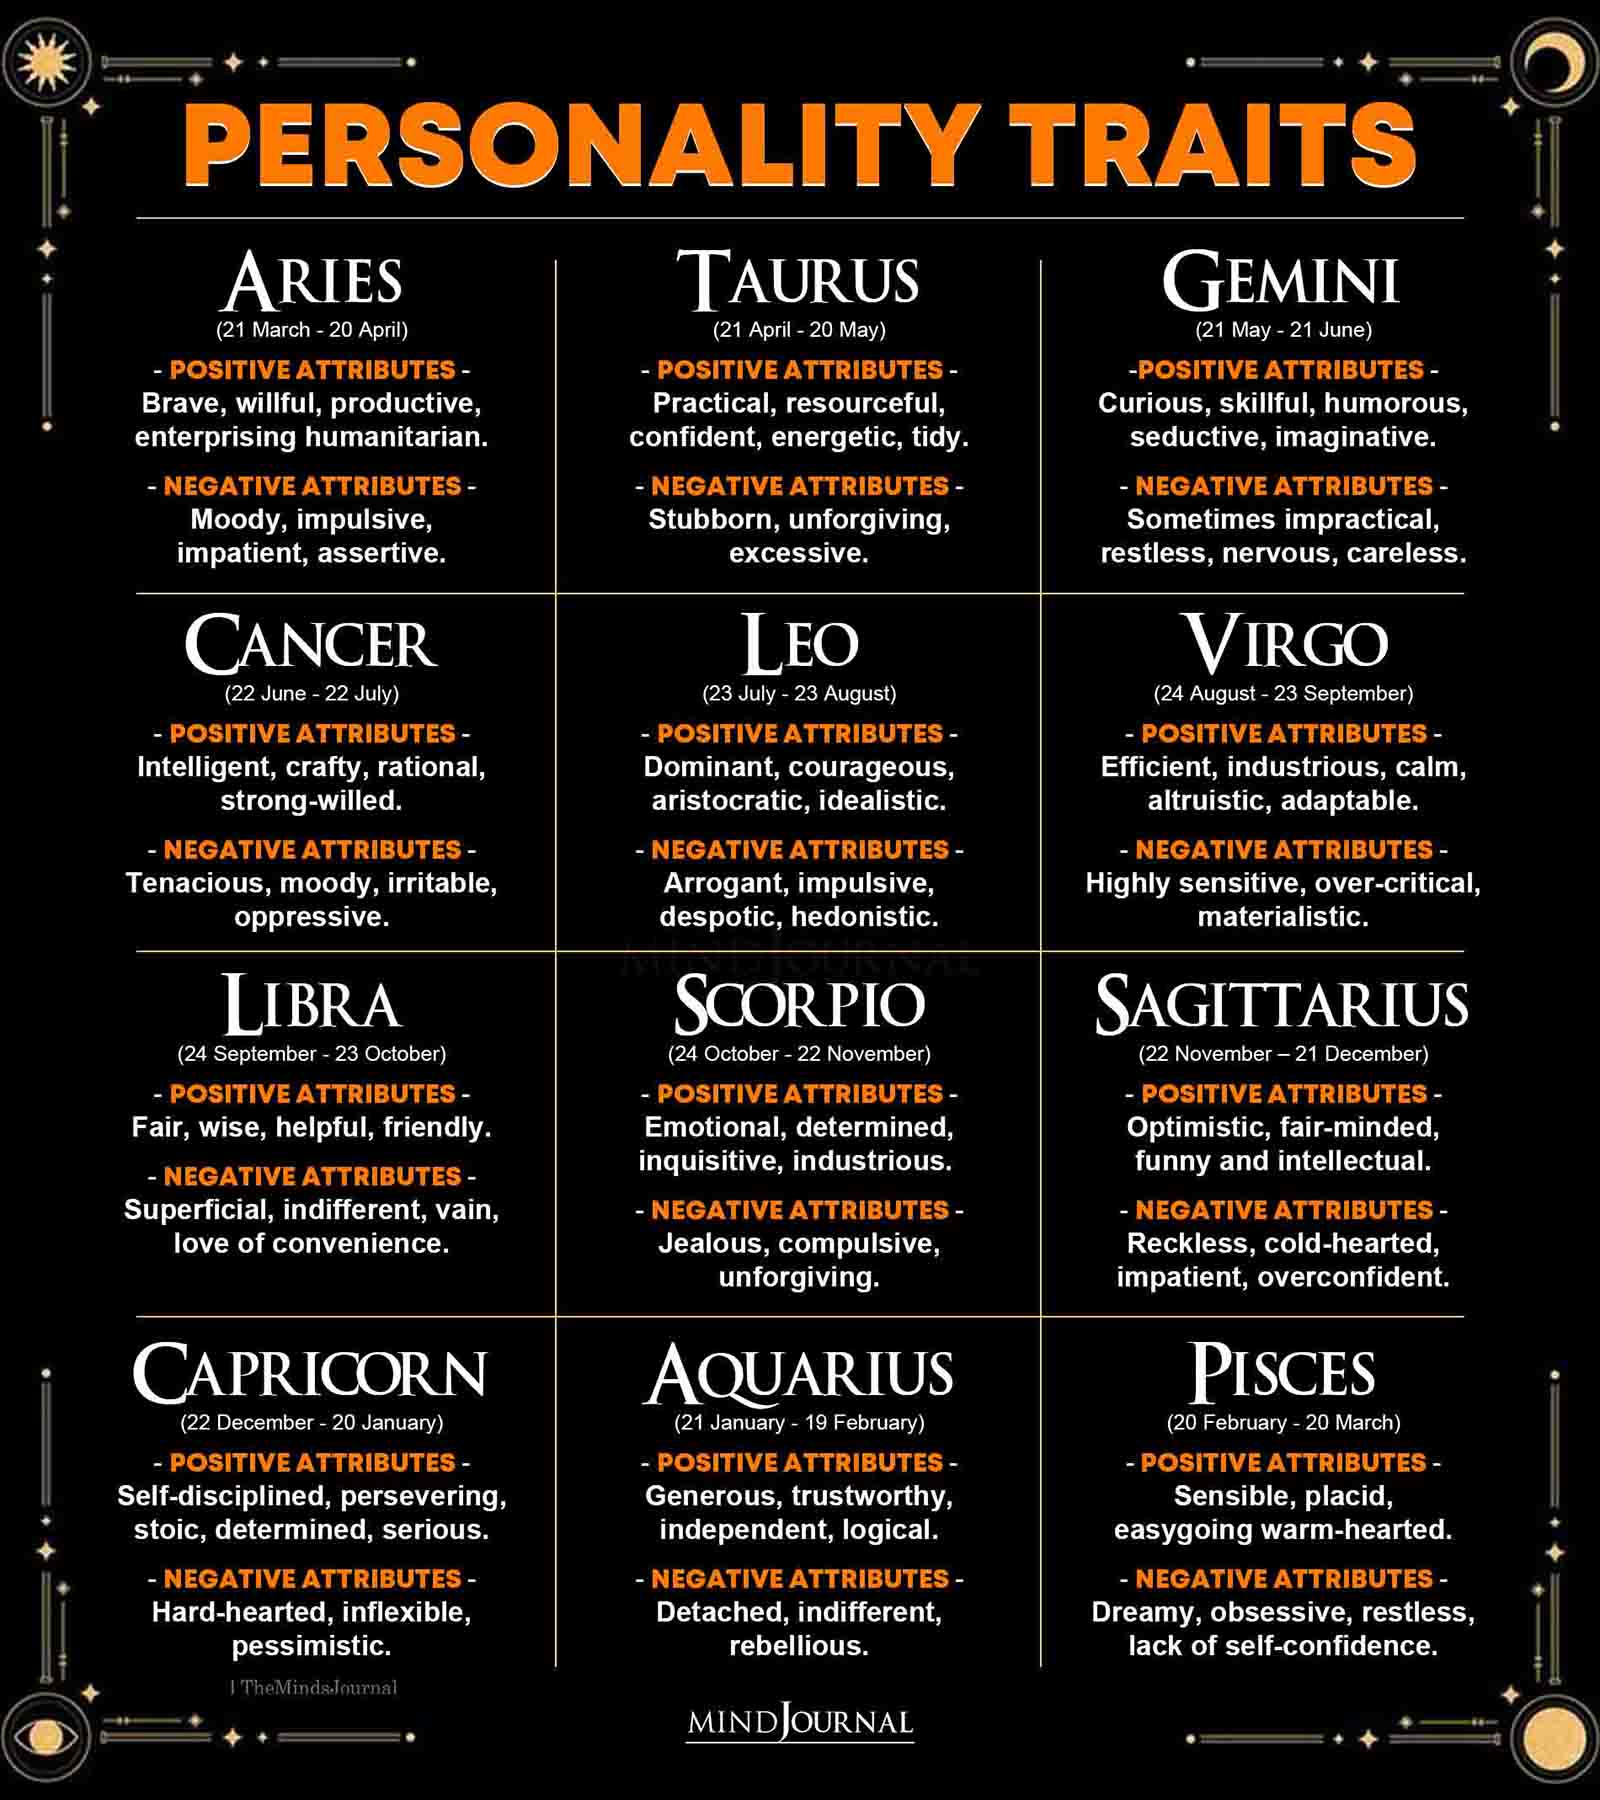 Zodiac Signs and Personality Traits